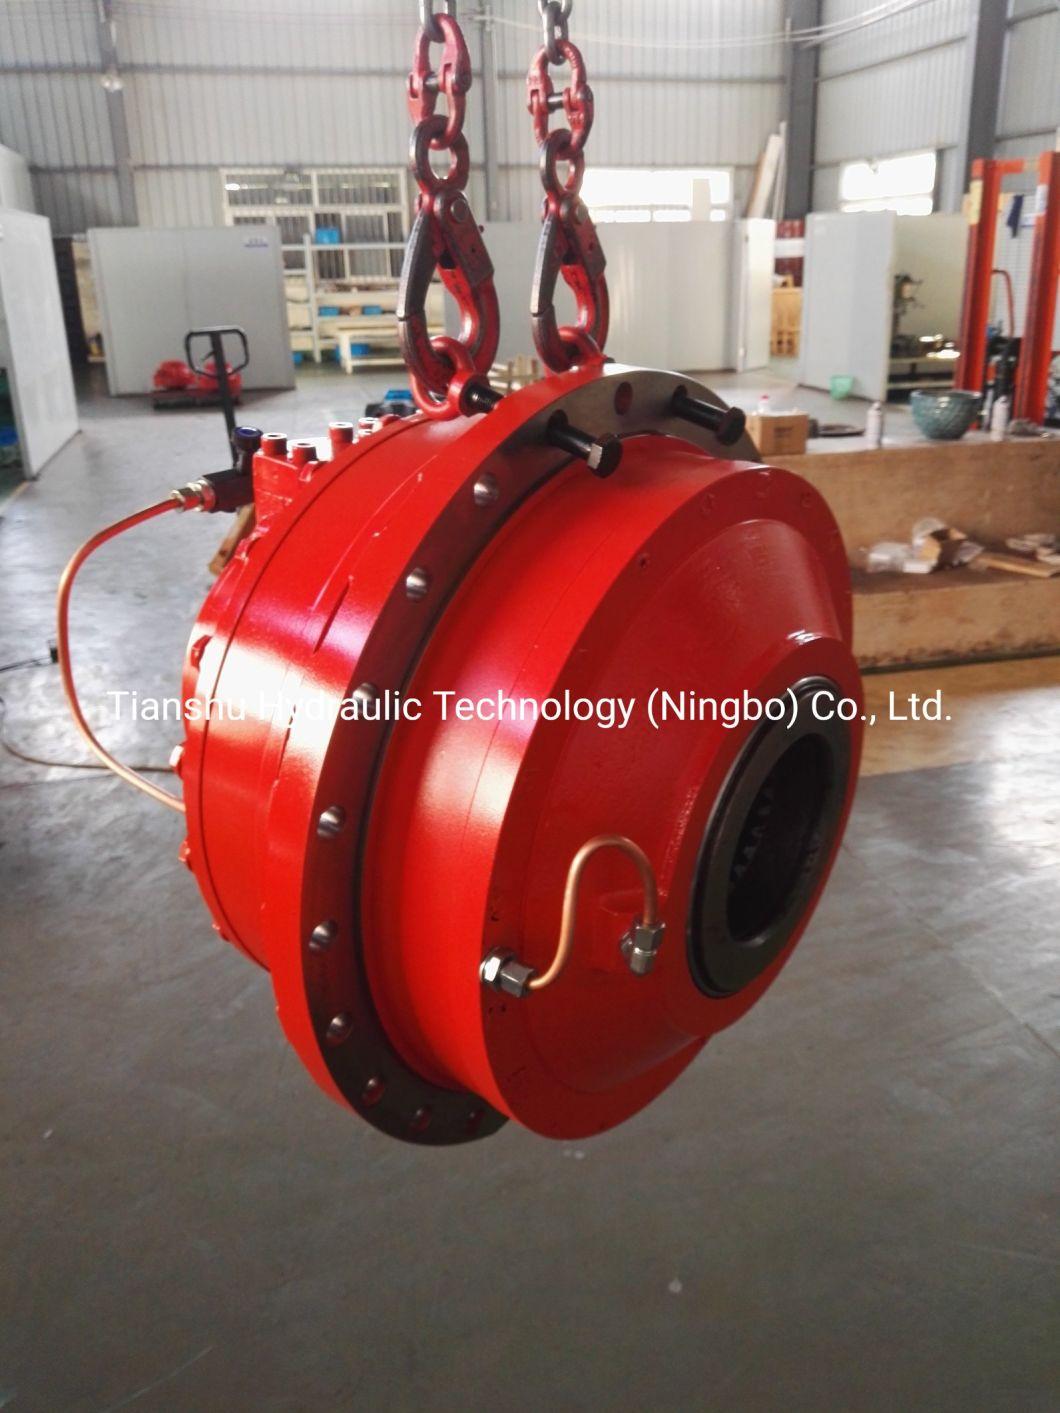 Hagglunds Radial Piston Hydraulic Motor Drive System Including Hydraulic Valve and Speed Reducer.